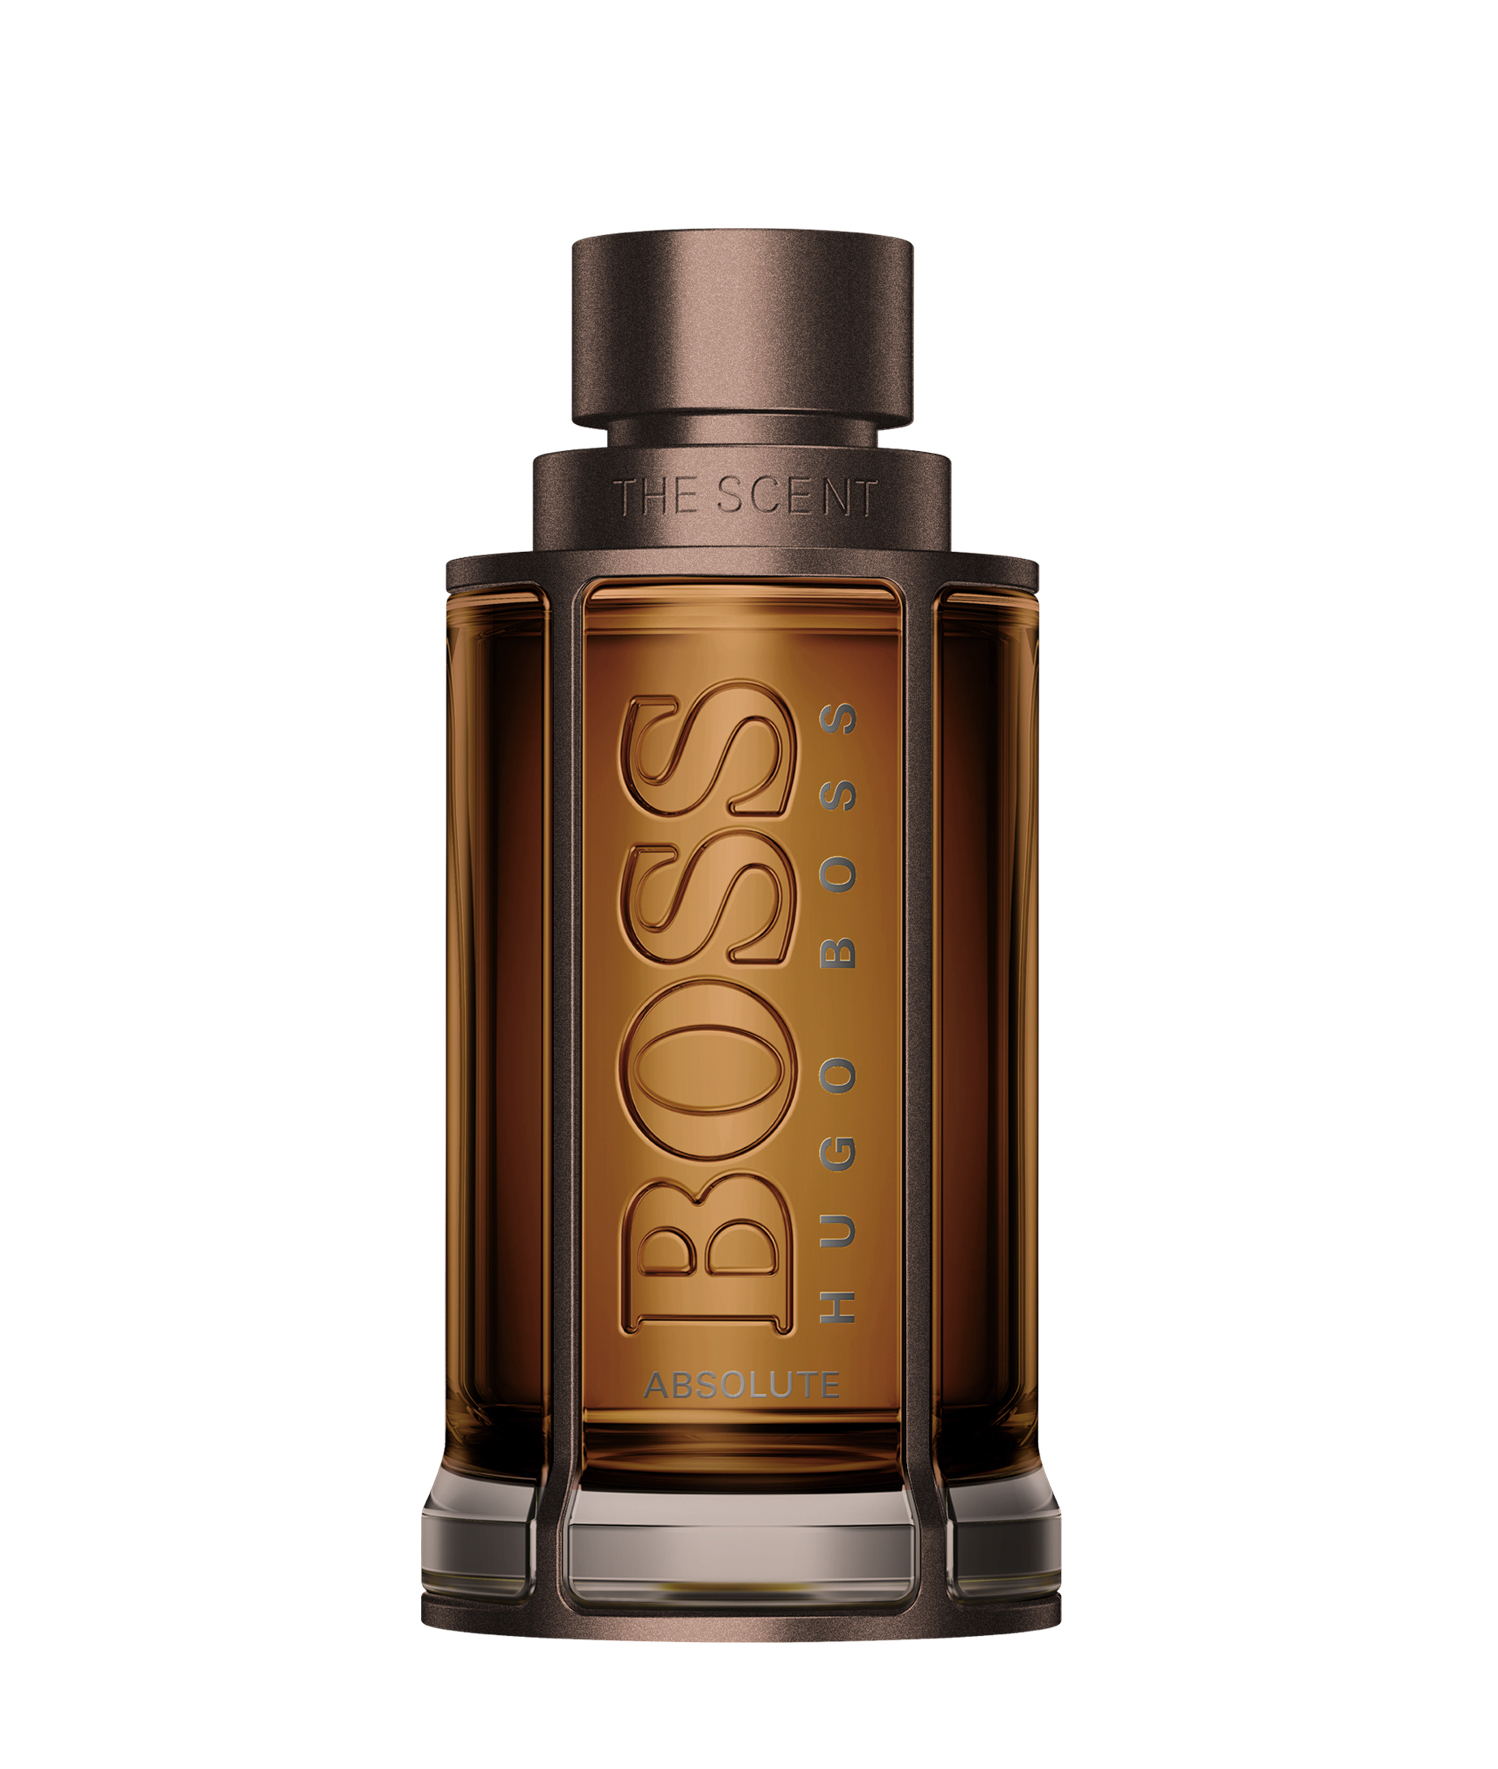 Boss The Scent Absolute Hugo Boss Colonia - una fragancia para Hombres 2019